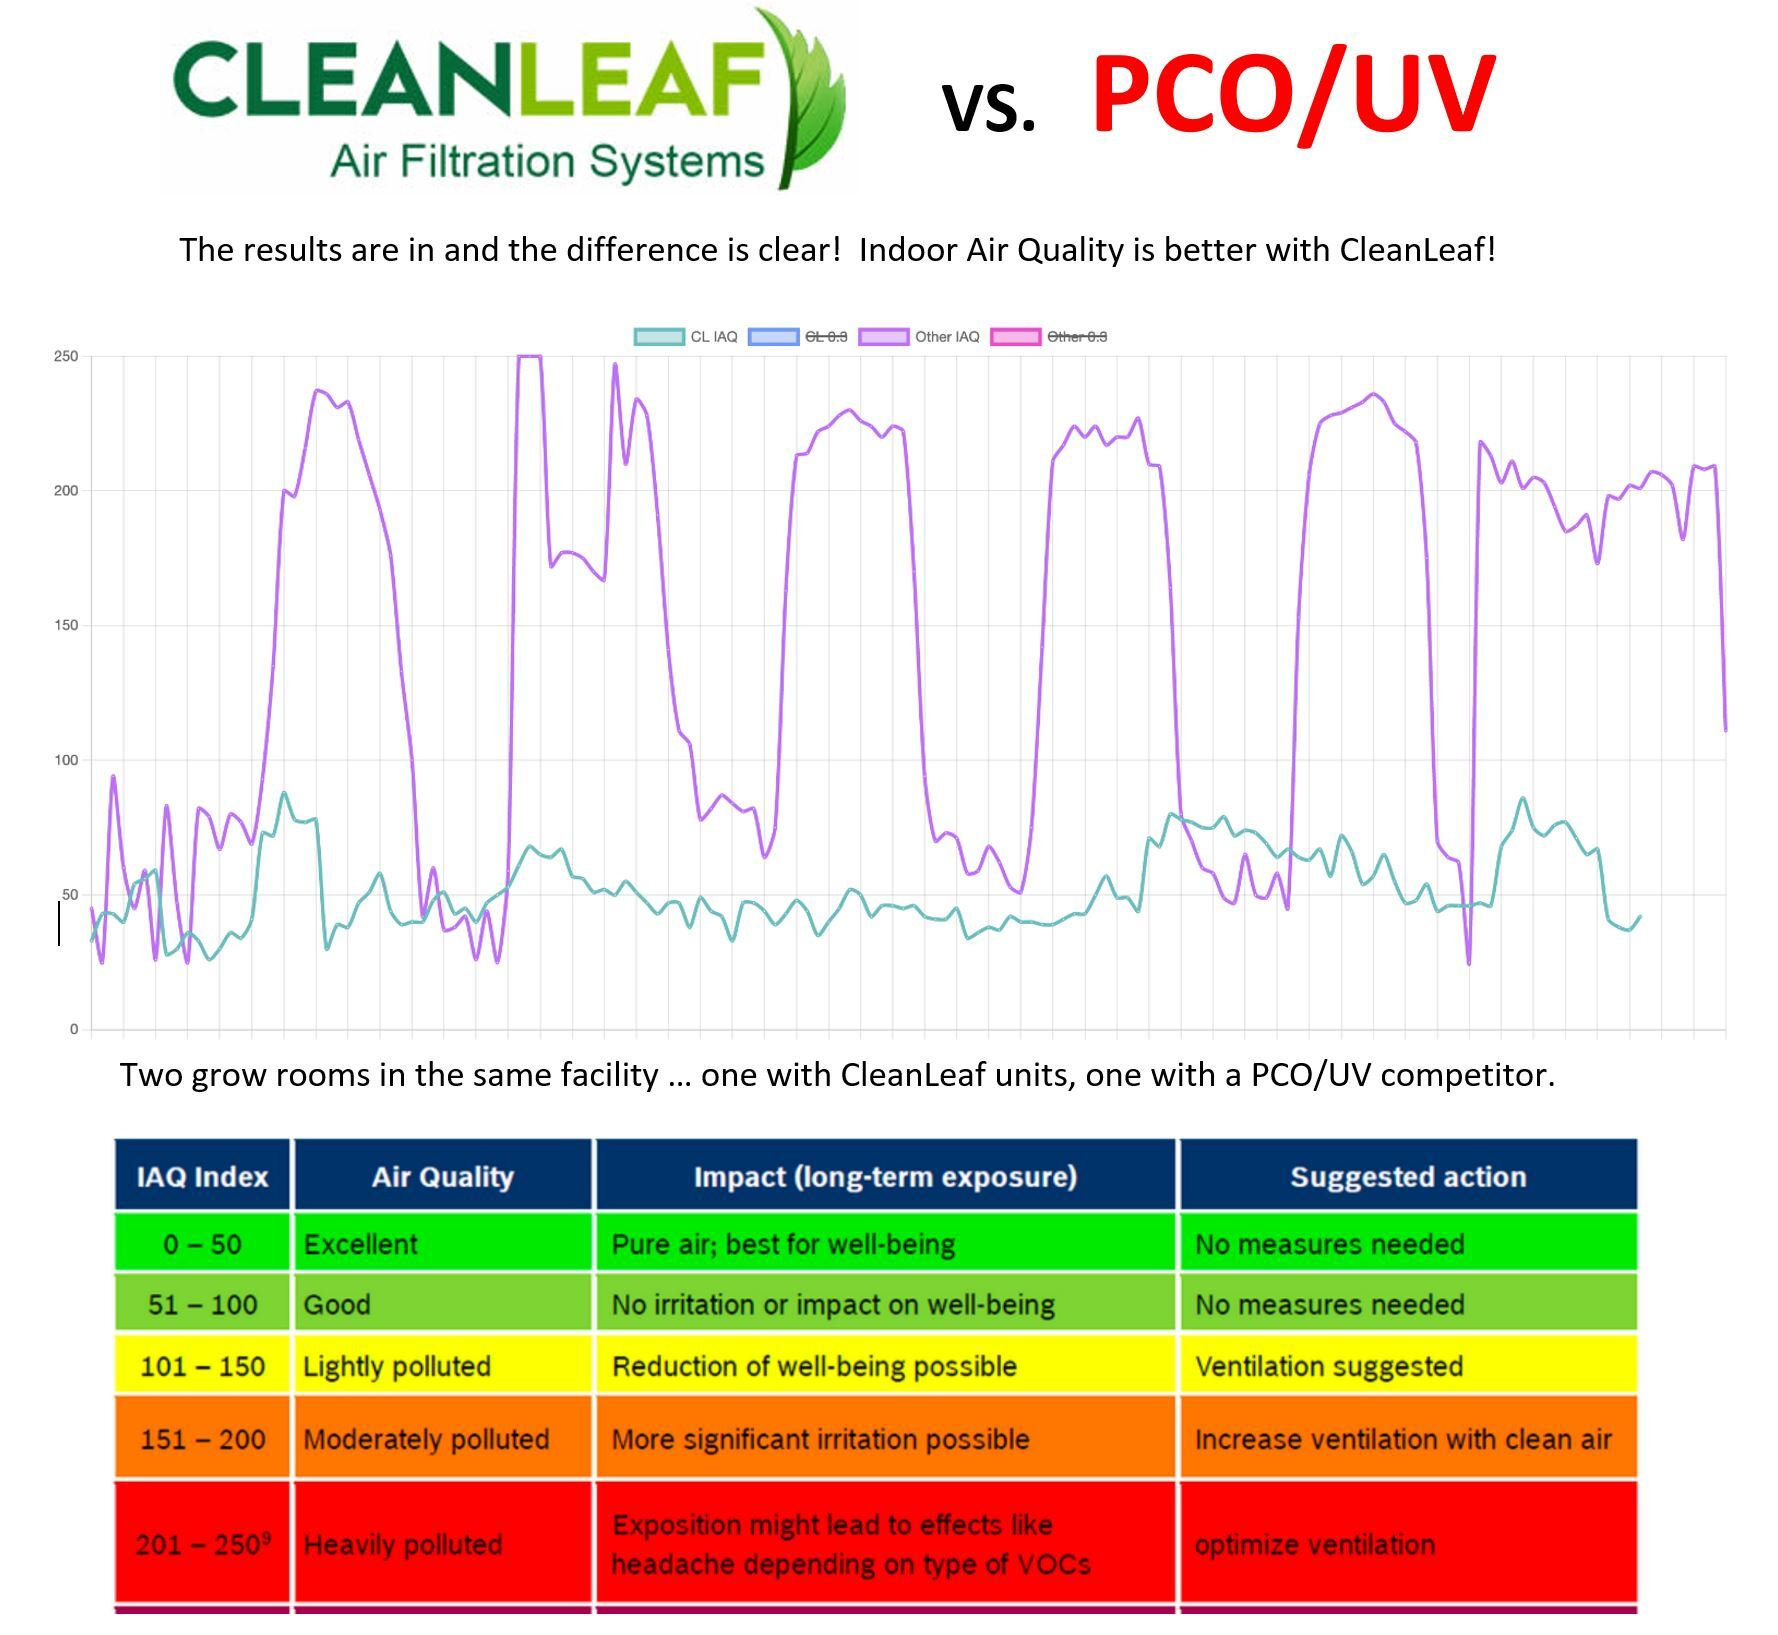 A graph showing the indoor air quality results of CleanLeaf units vs PCO technology in a growing facility.